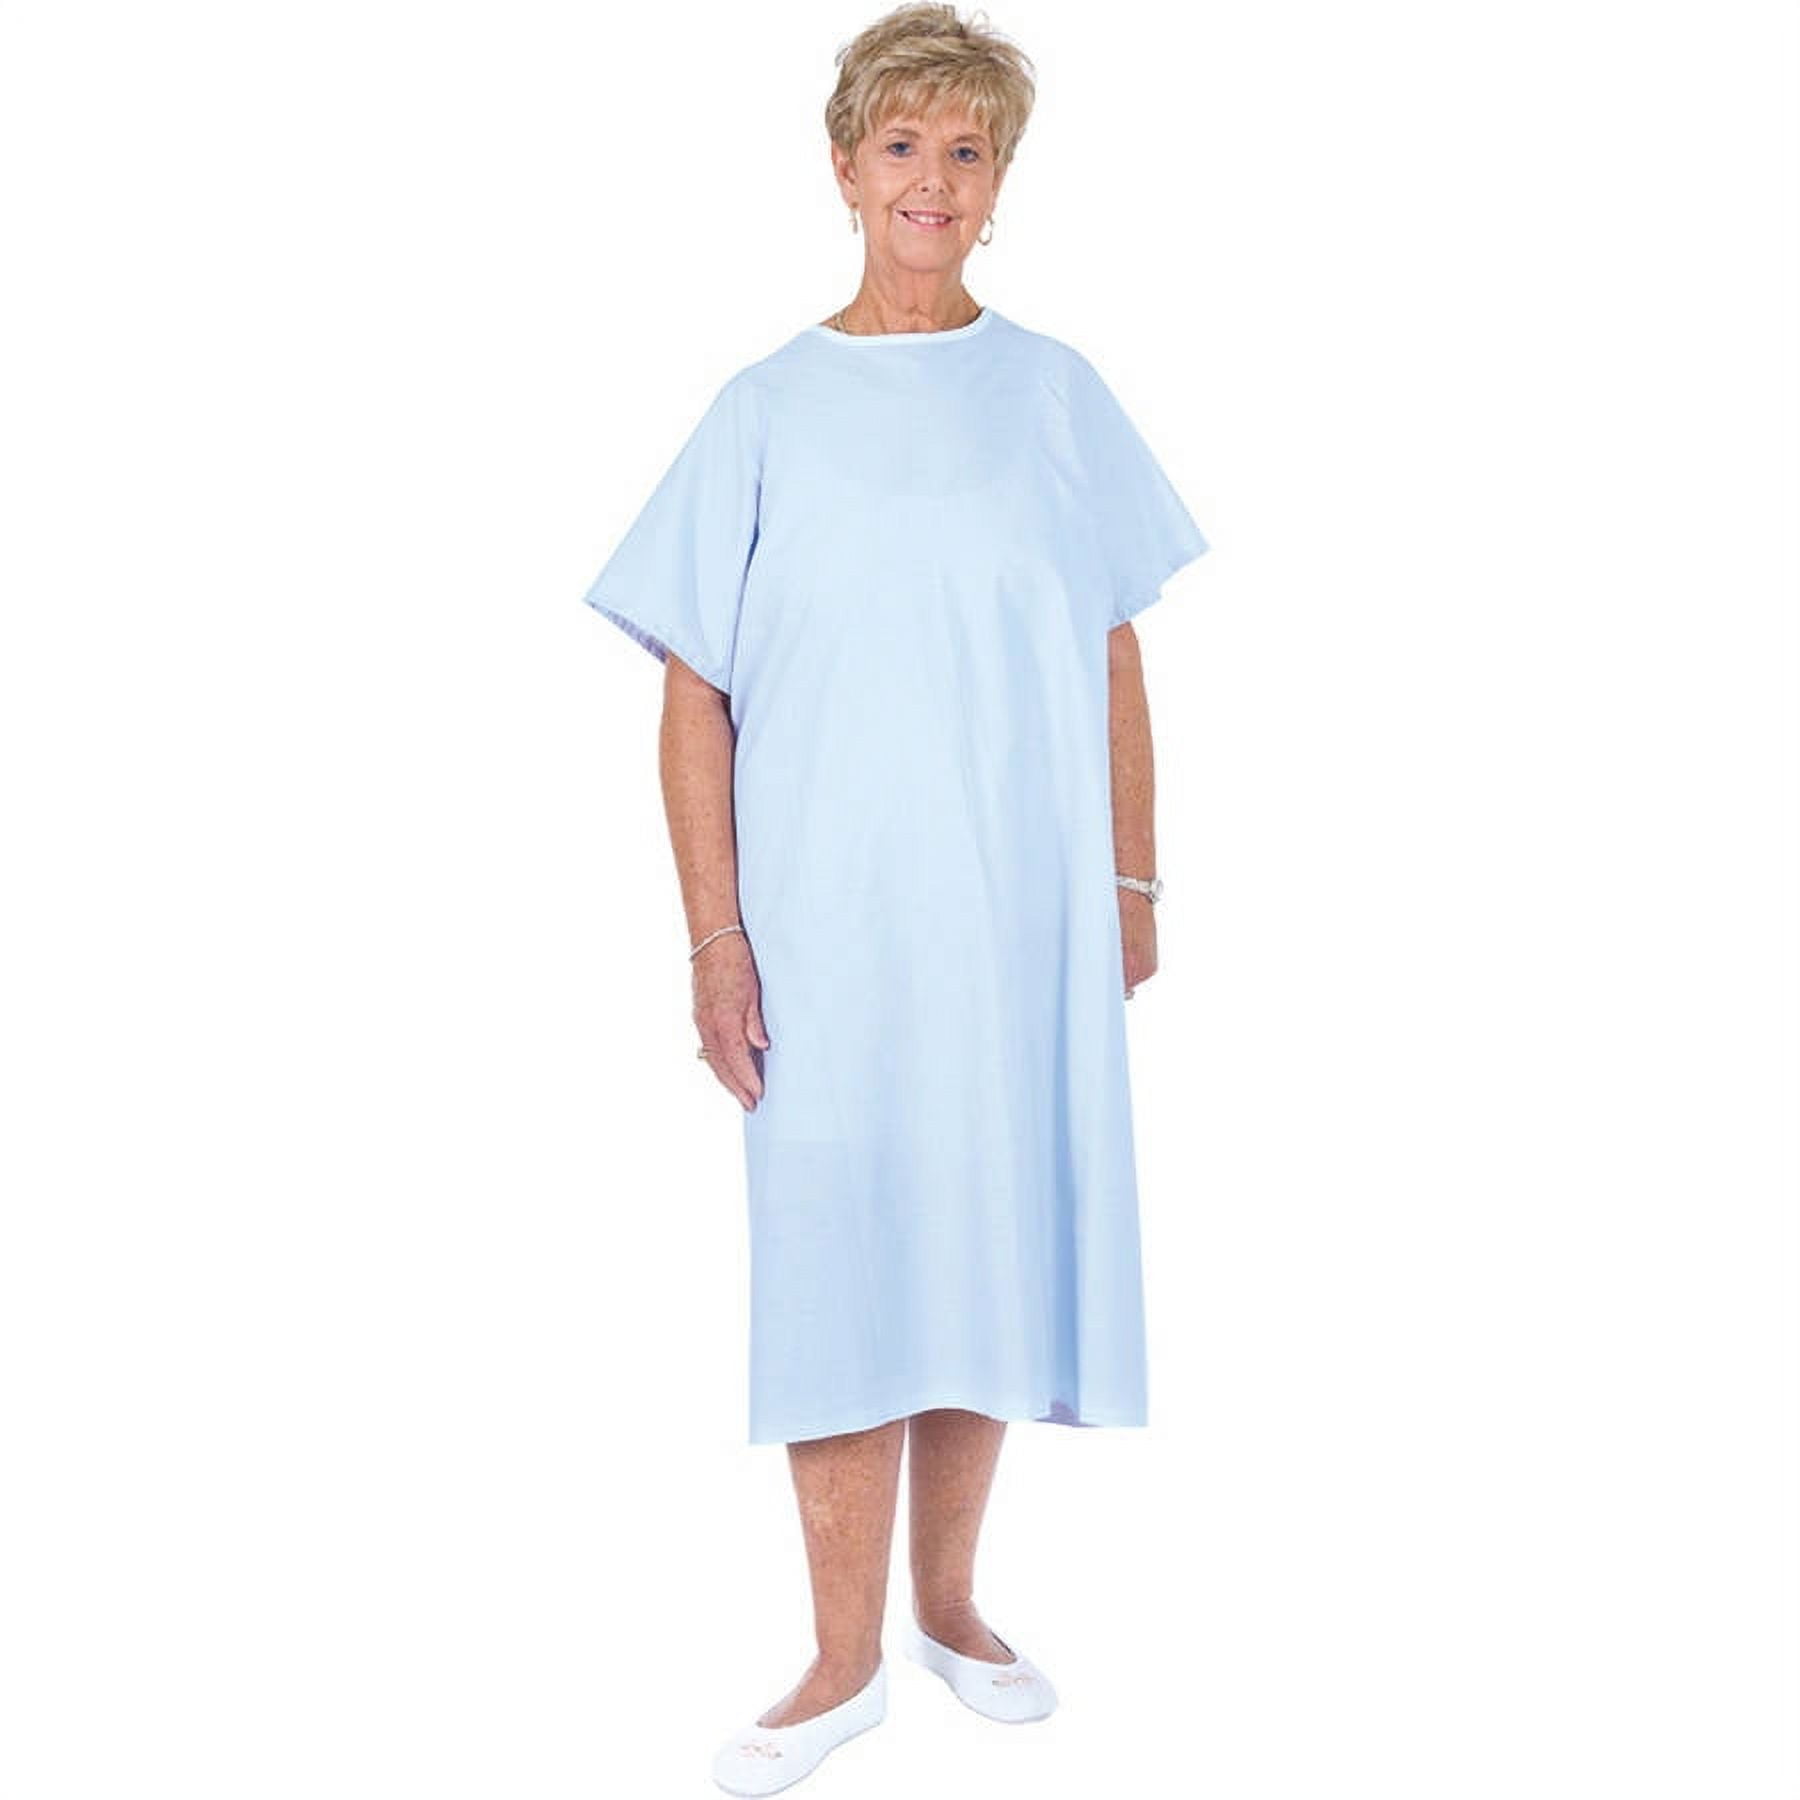 Essential Medical Supply Deluxe Patient Gown e488bbe7 eacb 44a2 9bad 89772f93c09e.249923f9e7c2d6d292f09e5f35bd043e